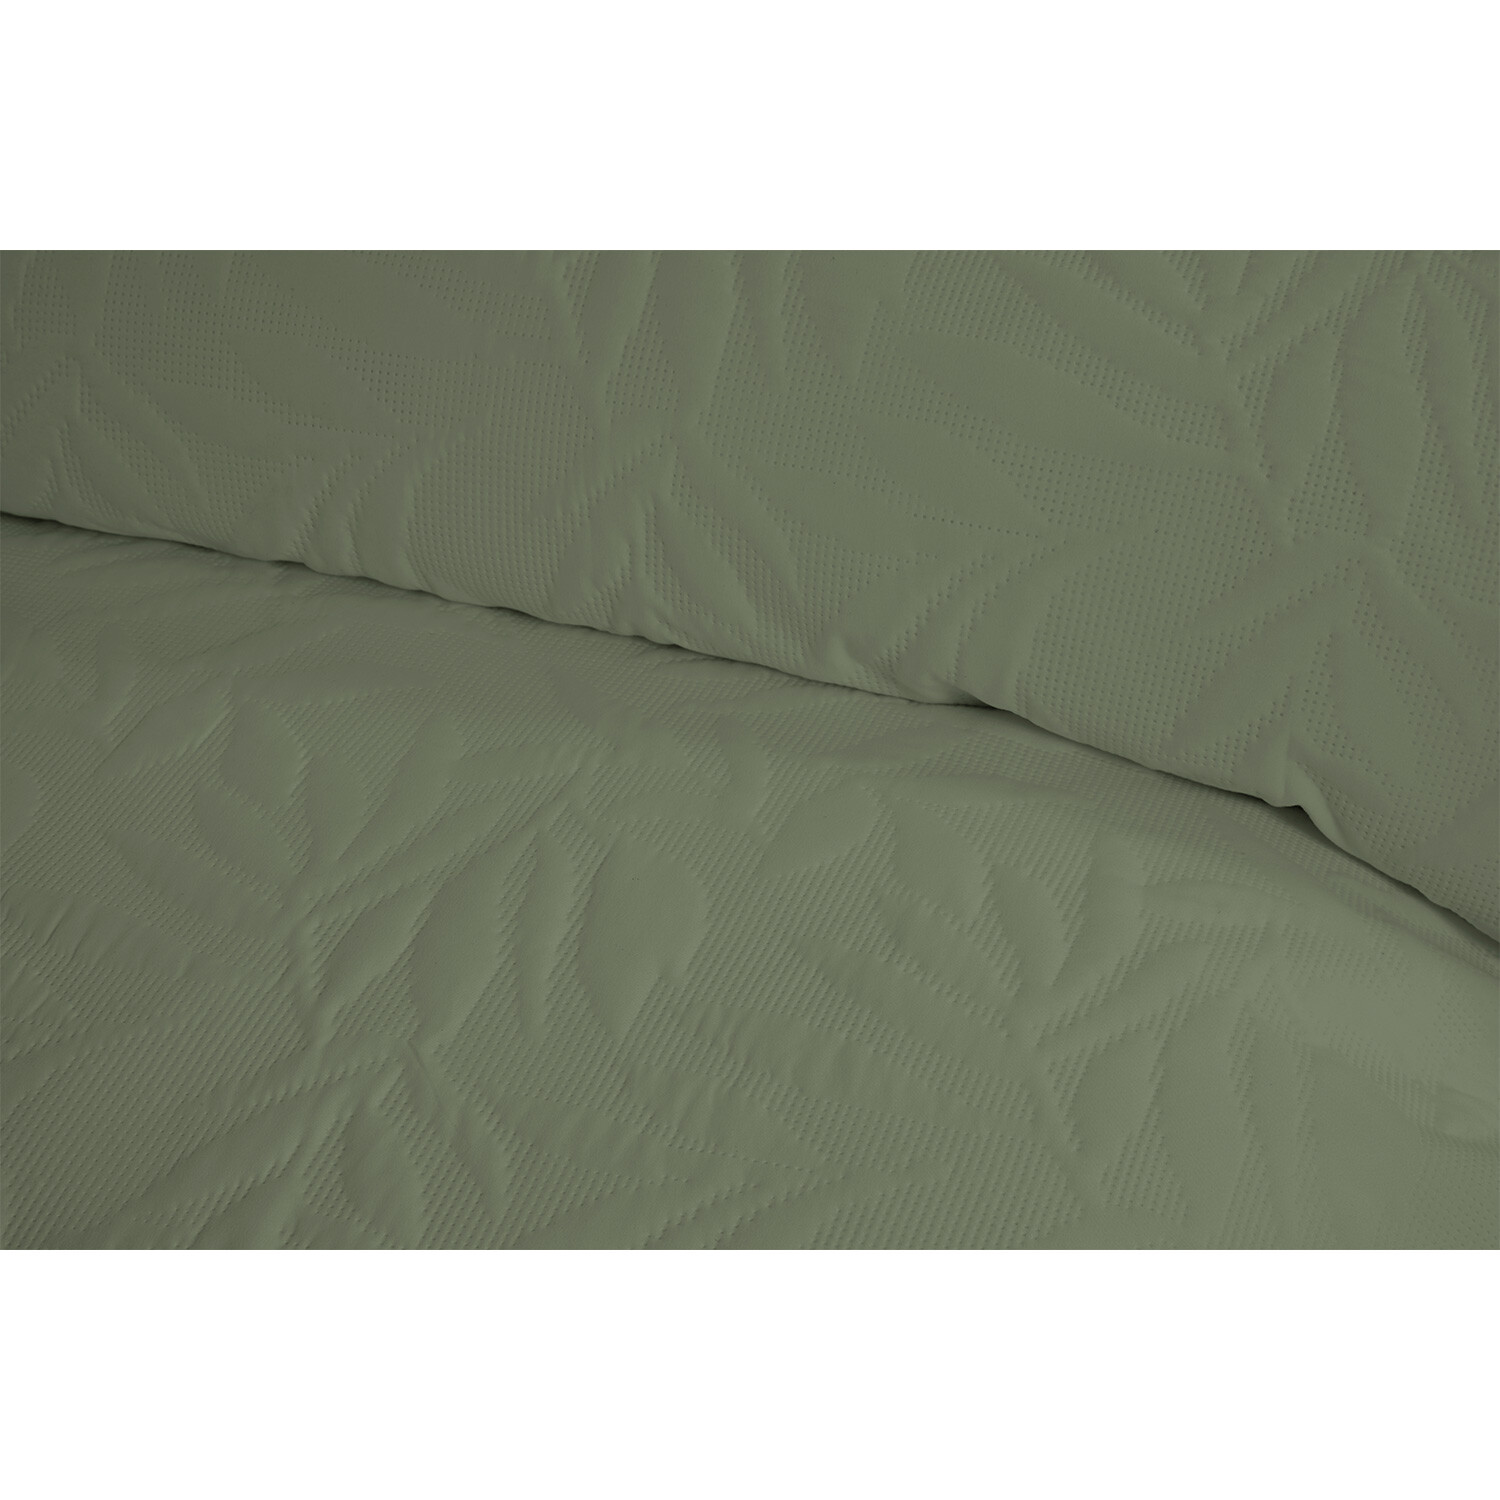 Avery Leaf Duvet Cover and Pillowcase Set - Olive Green / King Image 3